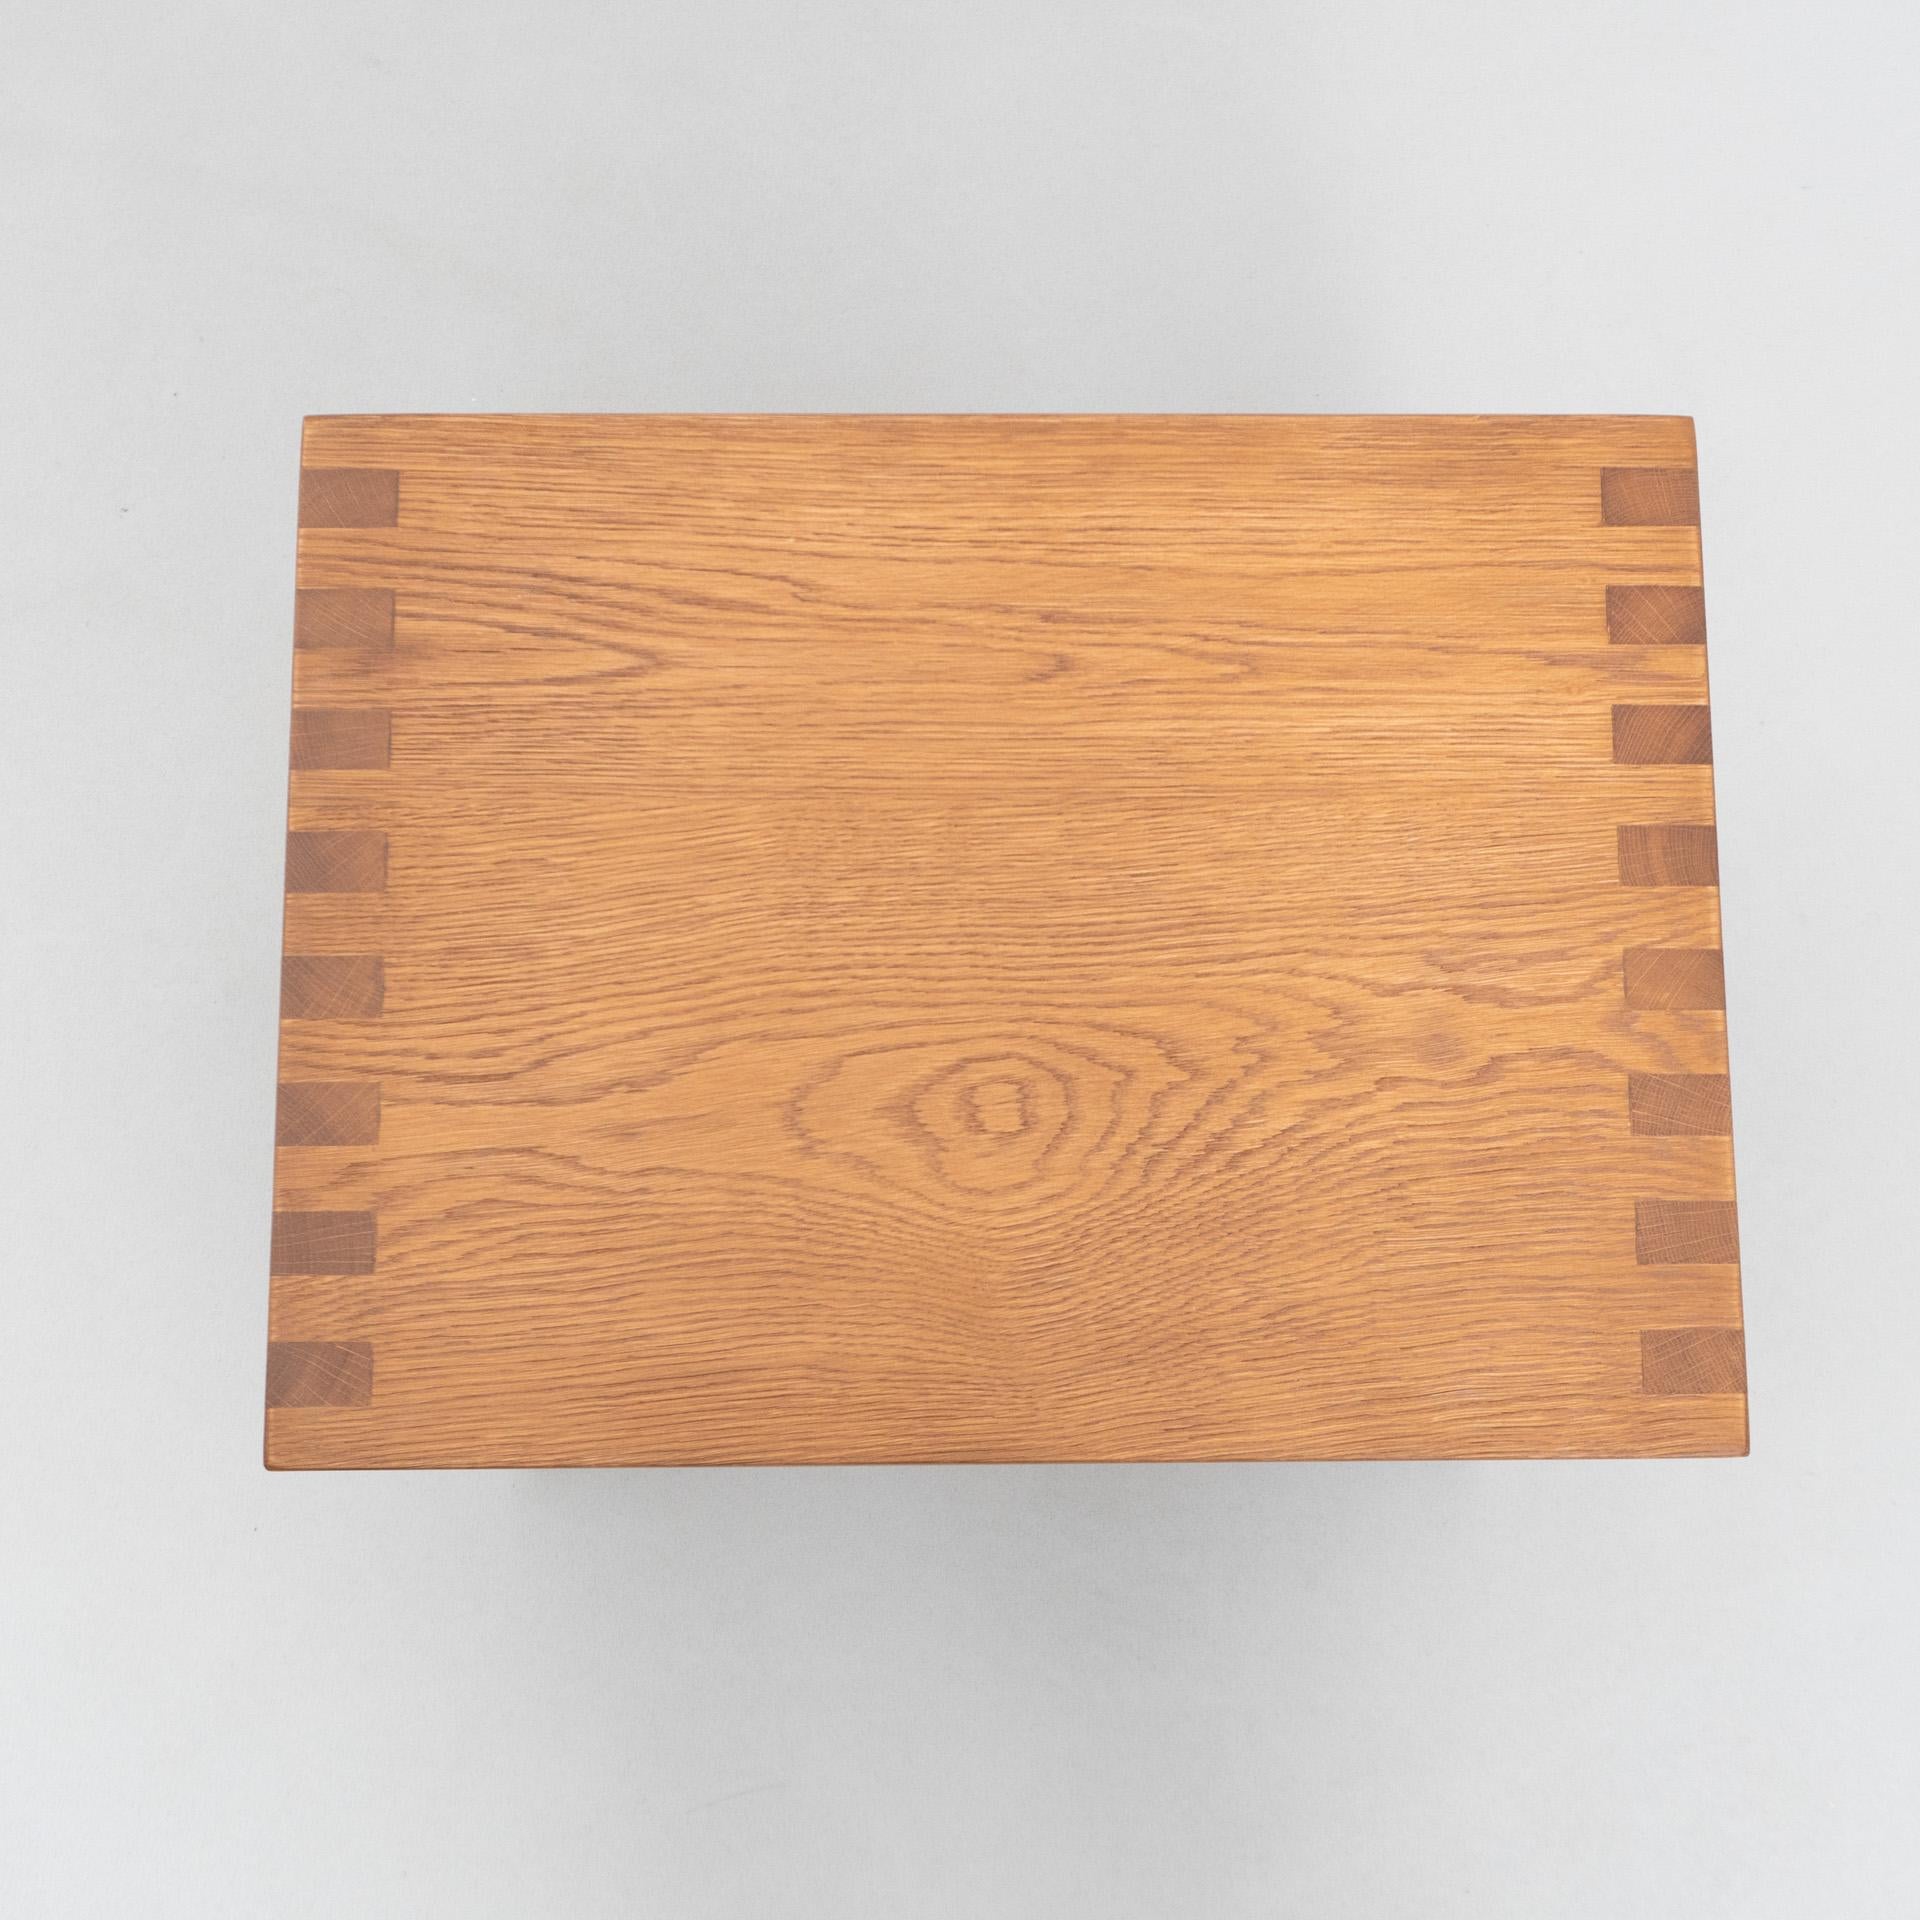 Dada Est. Contemporary Solid Oak Low Table For Sale 8